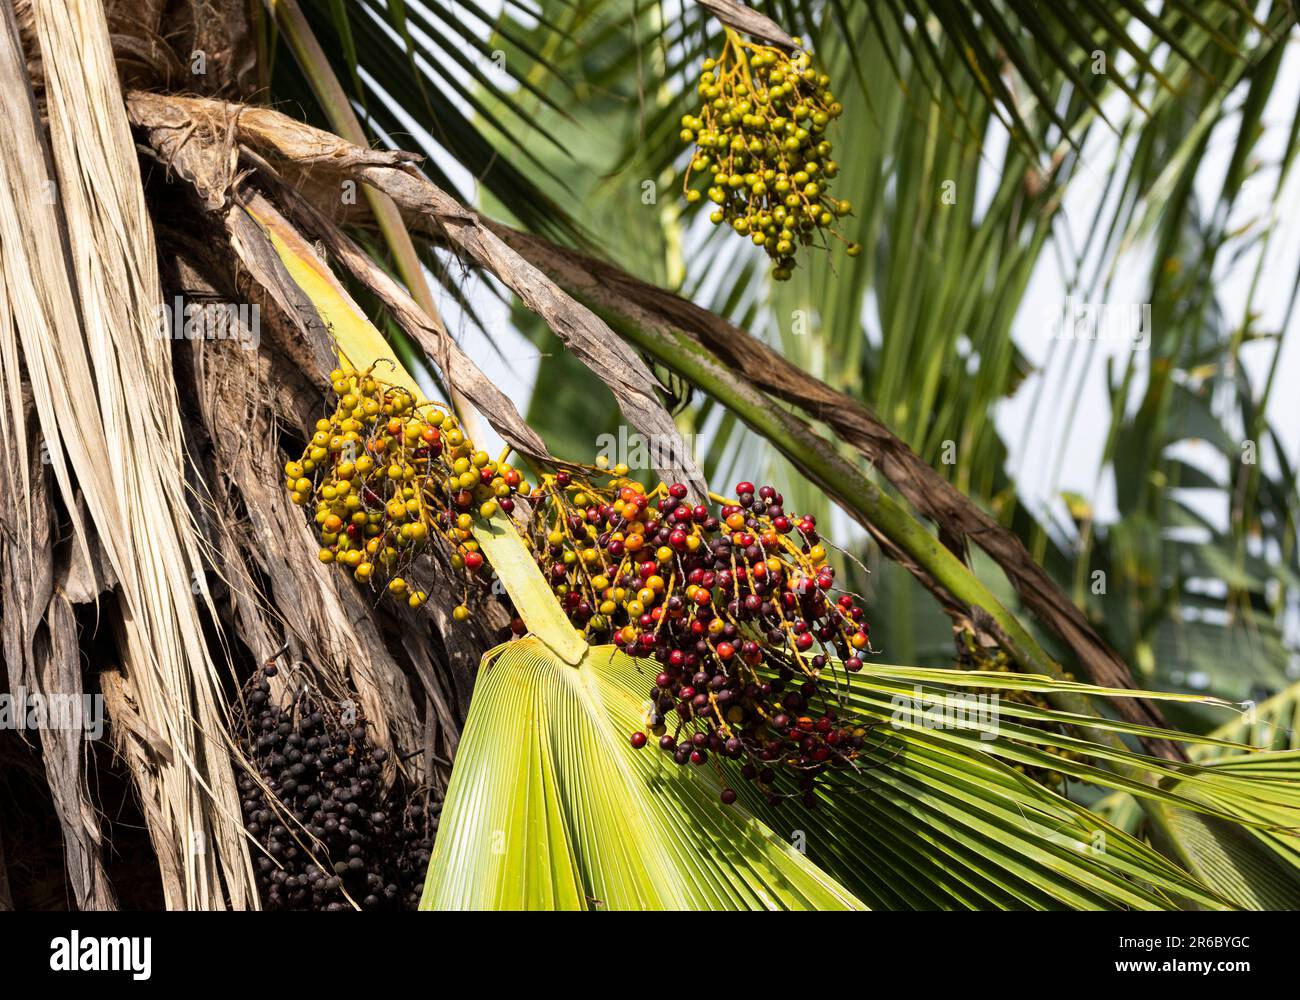 The flowers of the Coconut Palm have been pollinated and the clusters of fruit start to develop on drooping stalks. Stock Photo